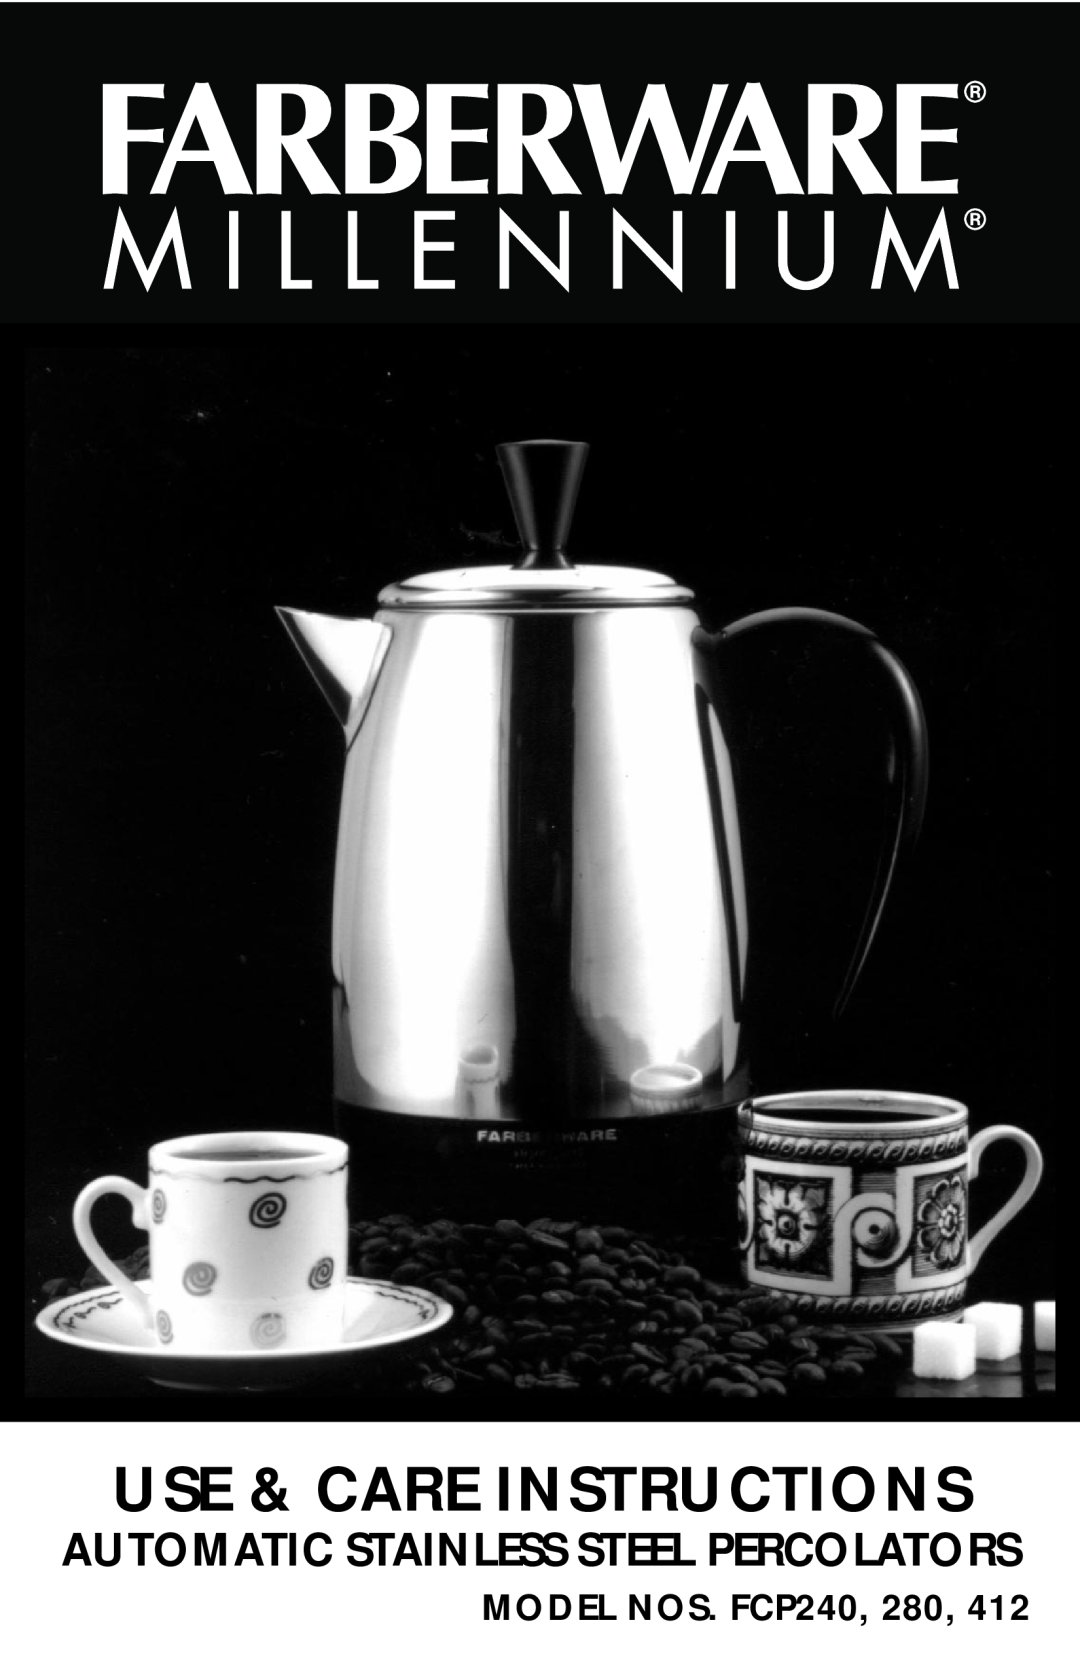 Farberware FCP412 manual Use & Care Instructions, Automatic Stainless Steel Percolators, MODEL NOS. FCP240 